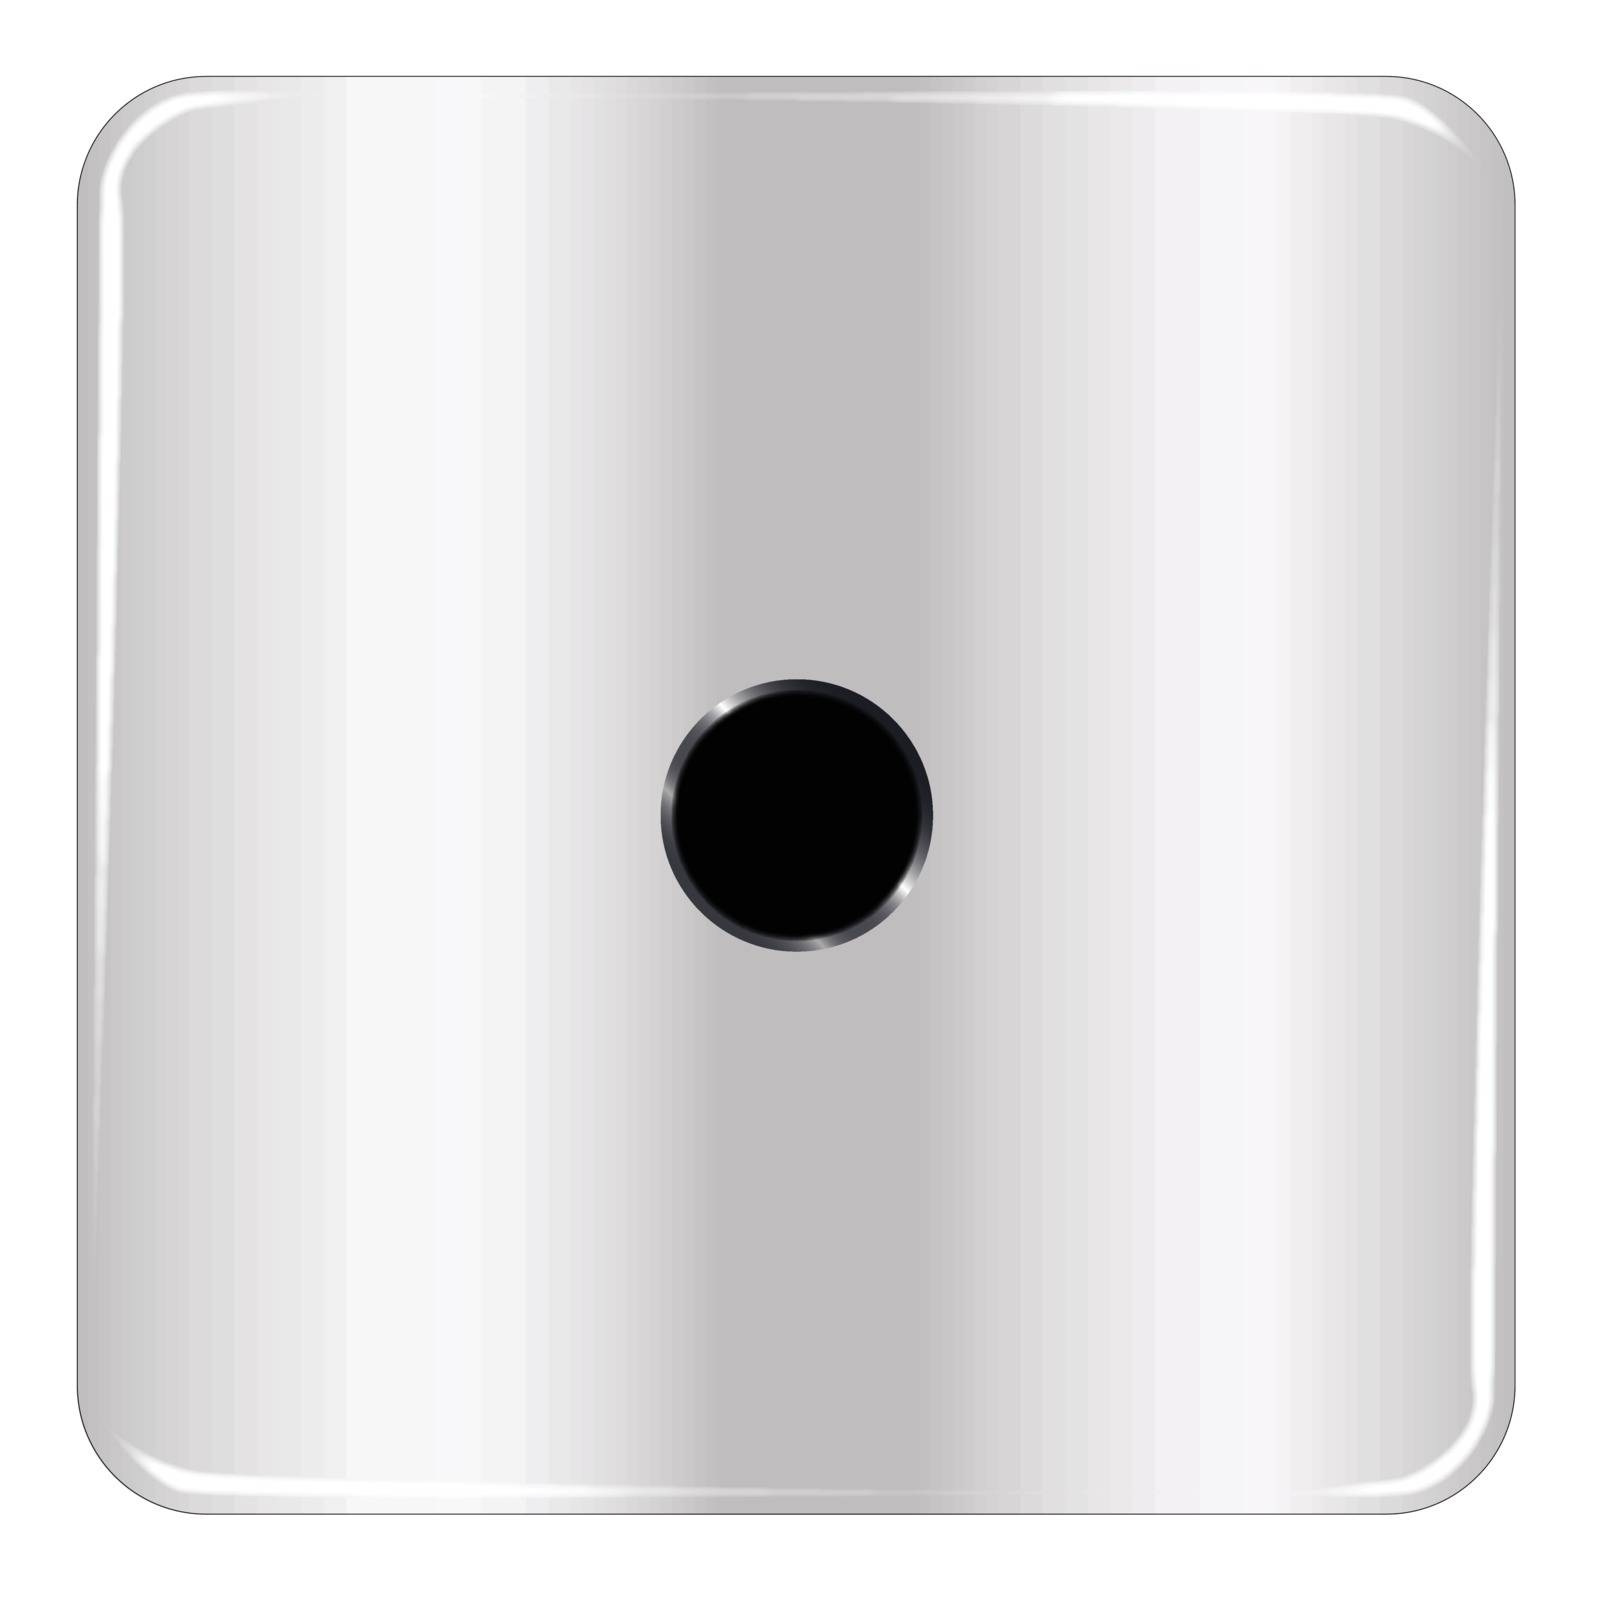 The face of a dice with one black spot over a white background